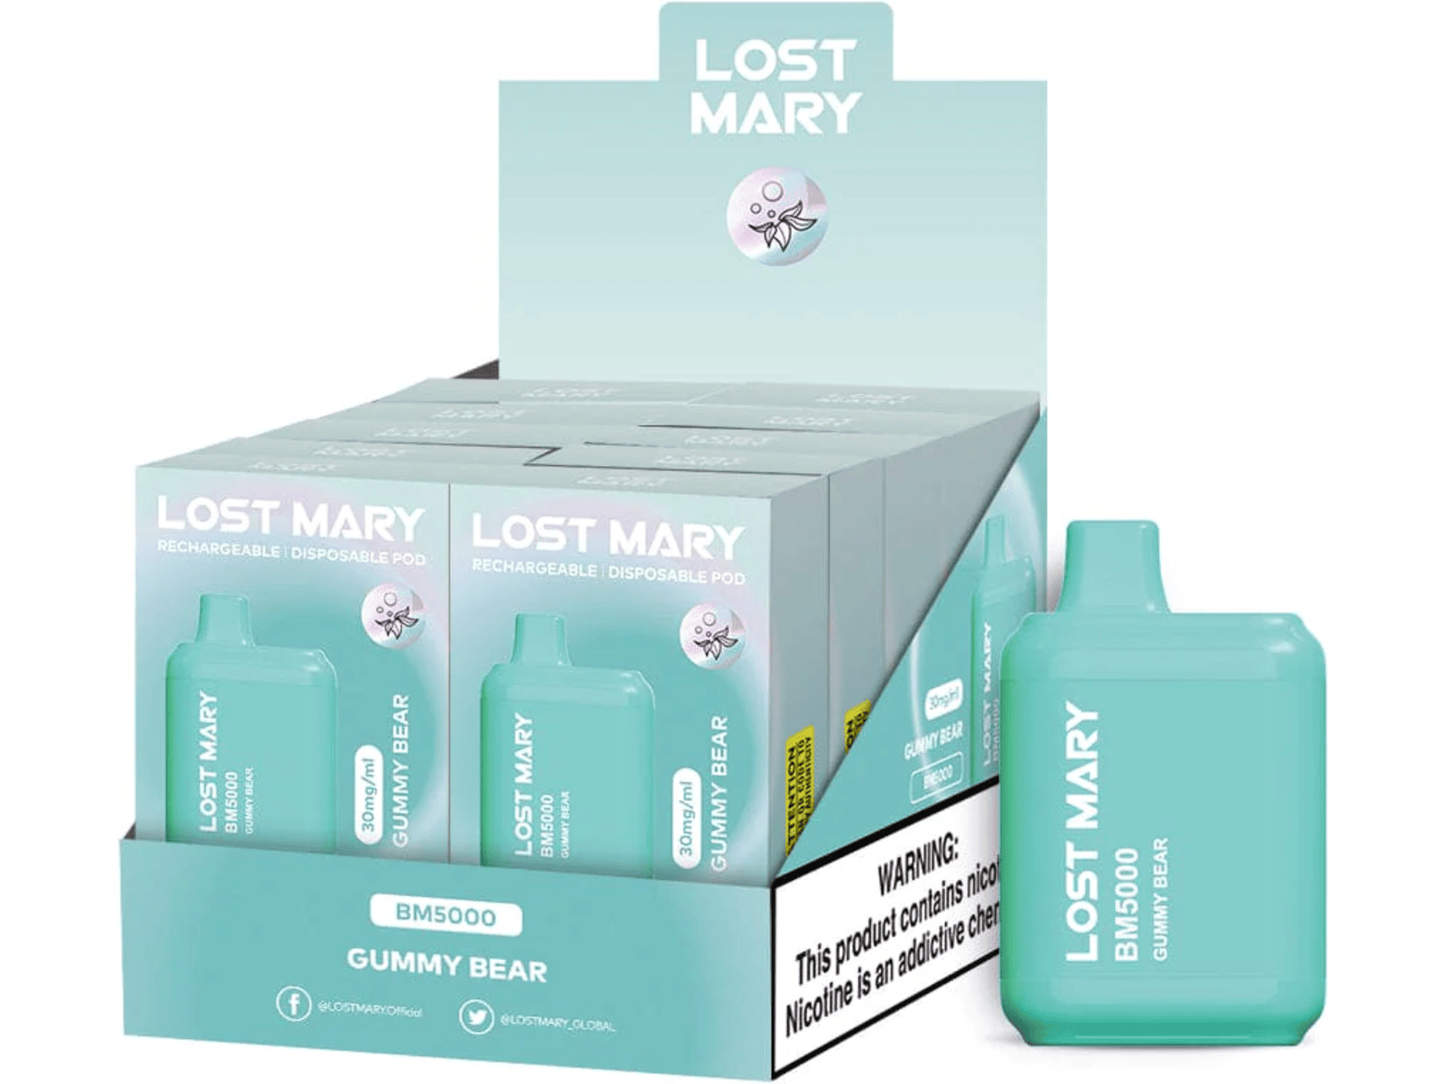 Lost Mary BM5000 Gummy Bear flavored disposable vape device and box.